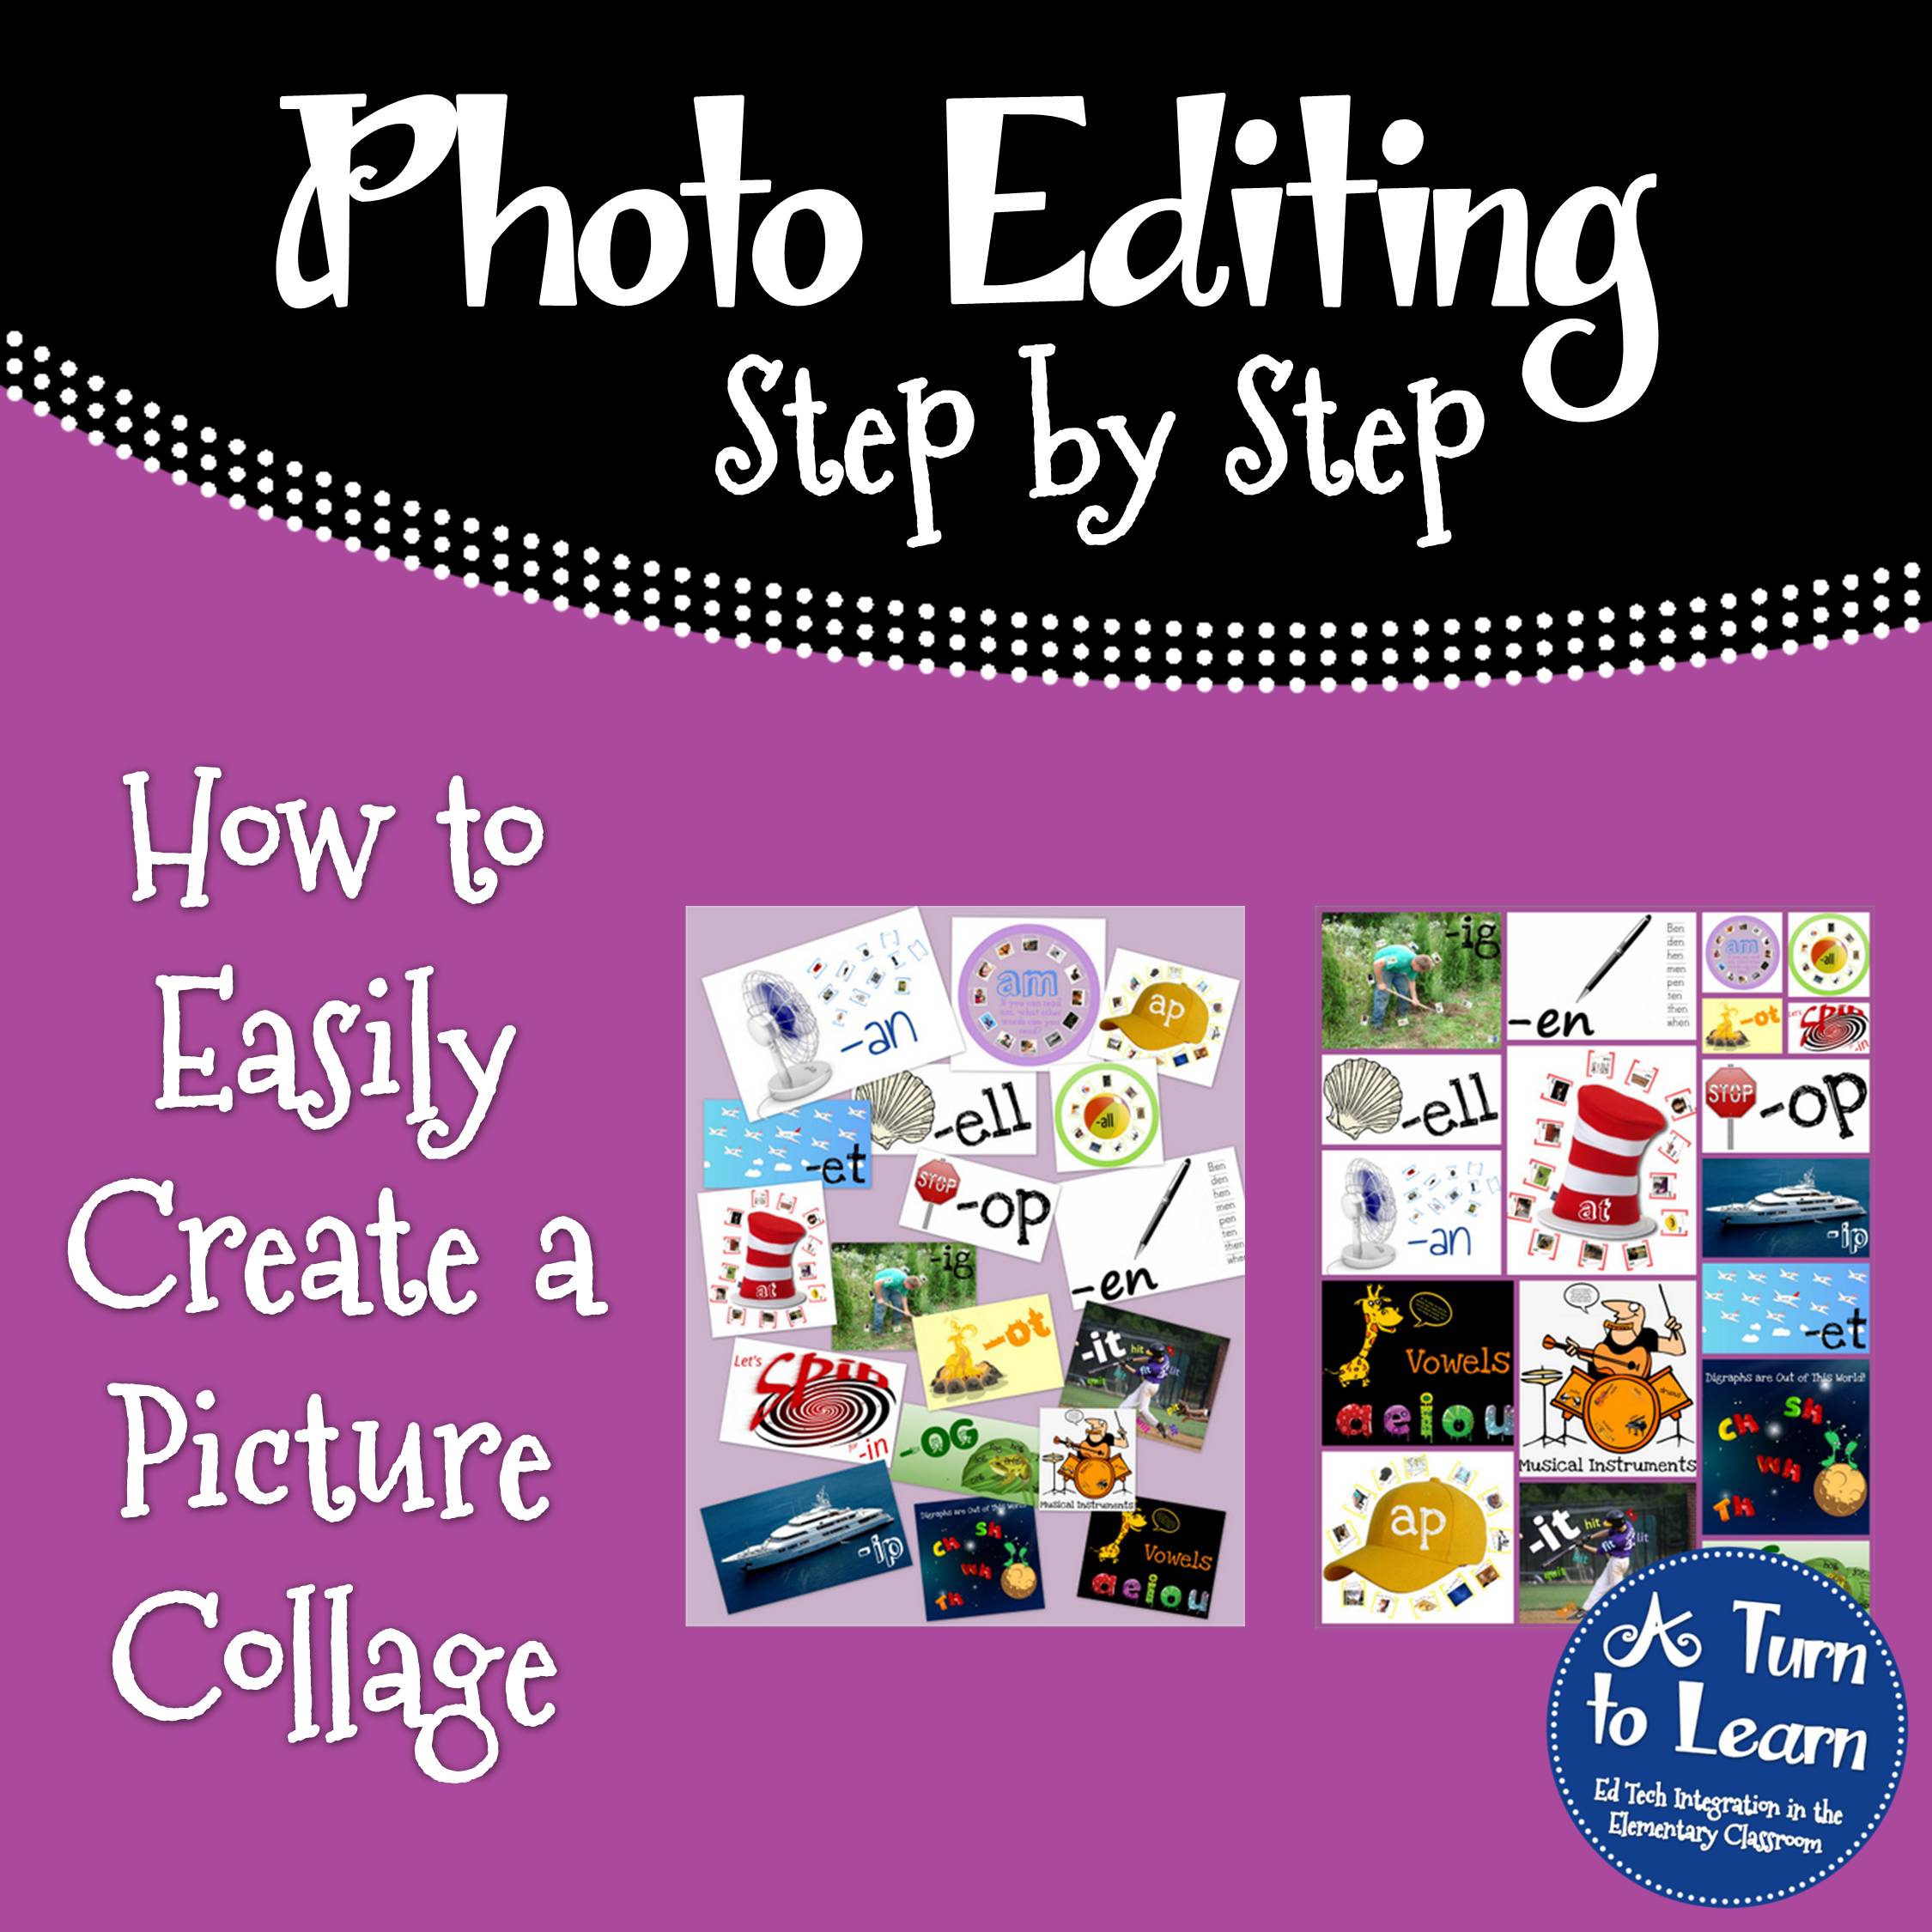 How to Easily Create a Picture Collage